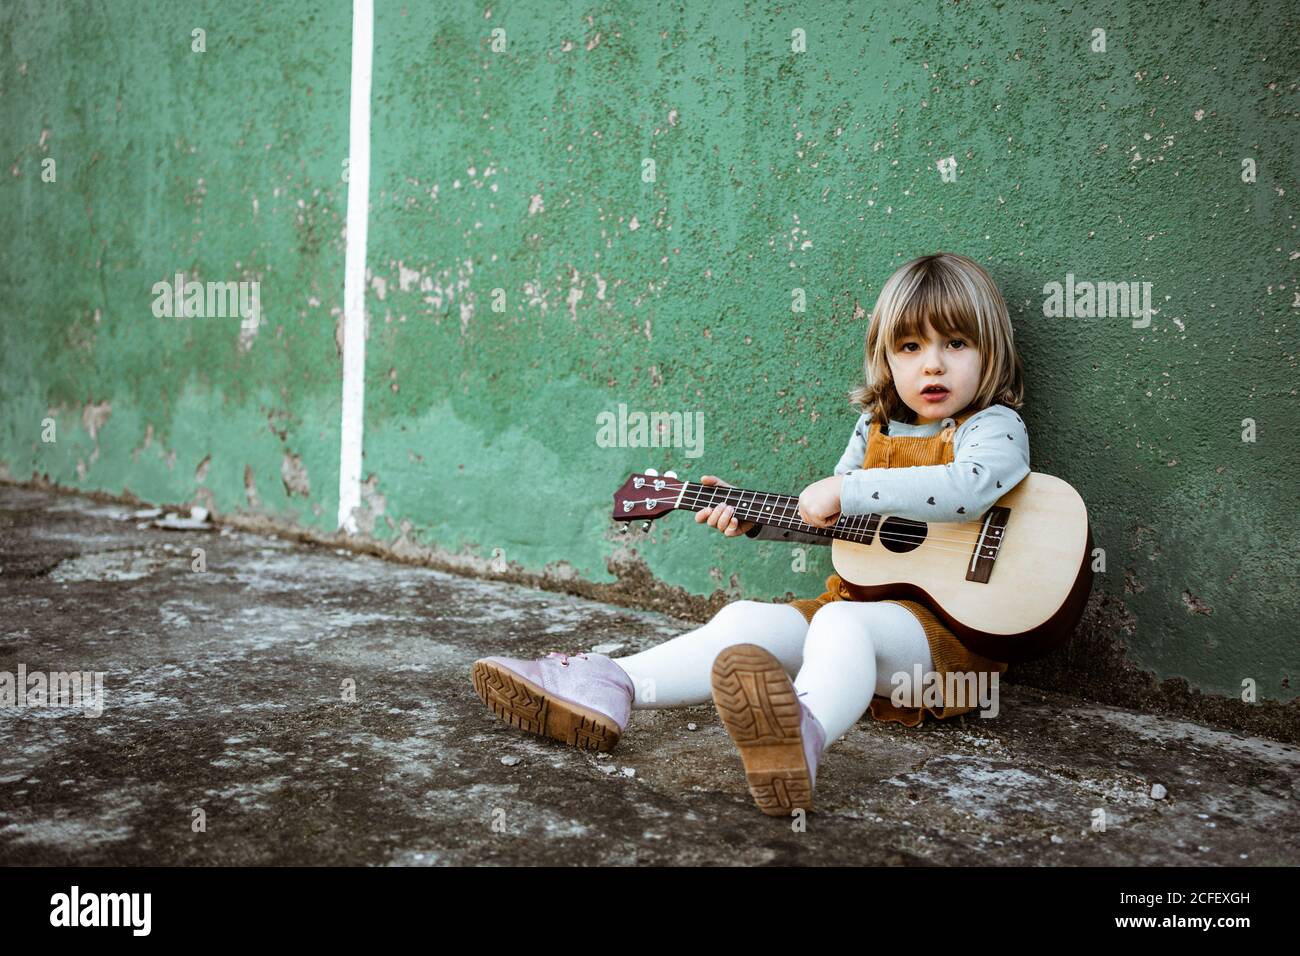 Little girl with ukulele sitting on rough ground near kick scooter against weathered green wall on street Stock Photo